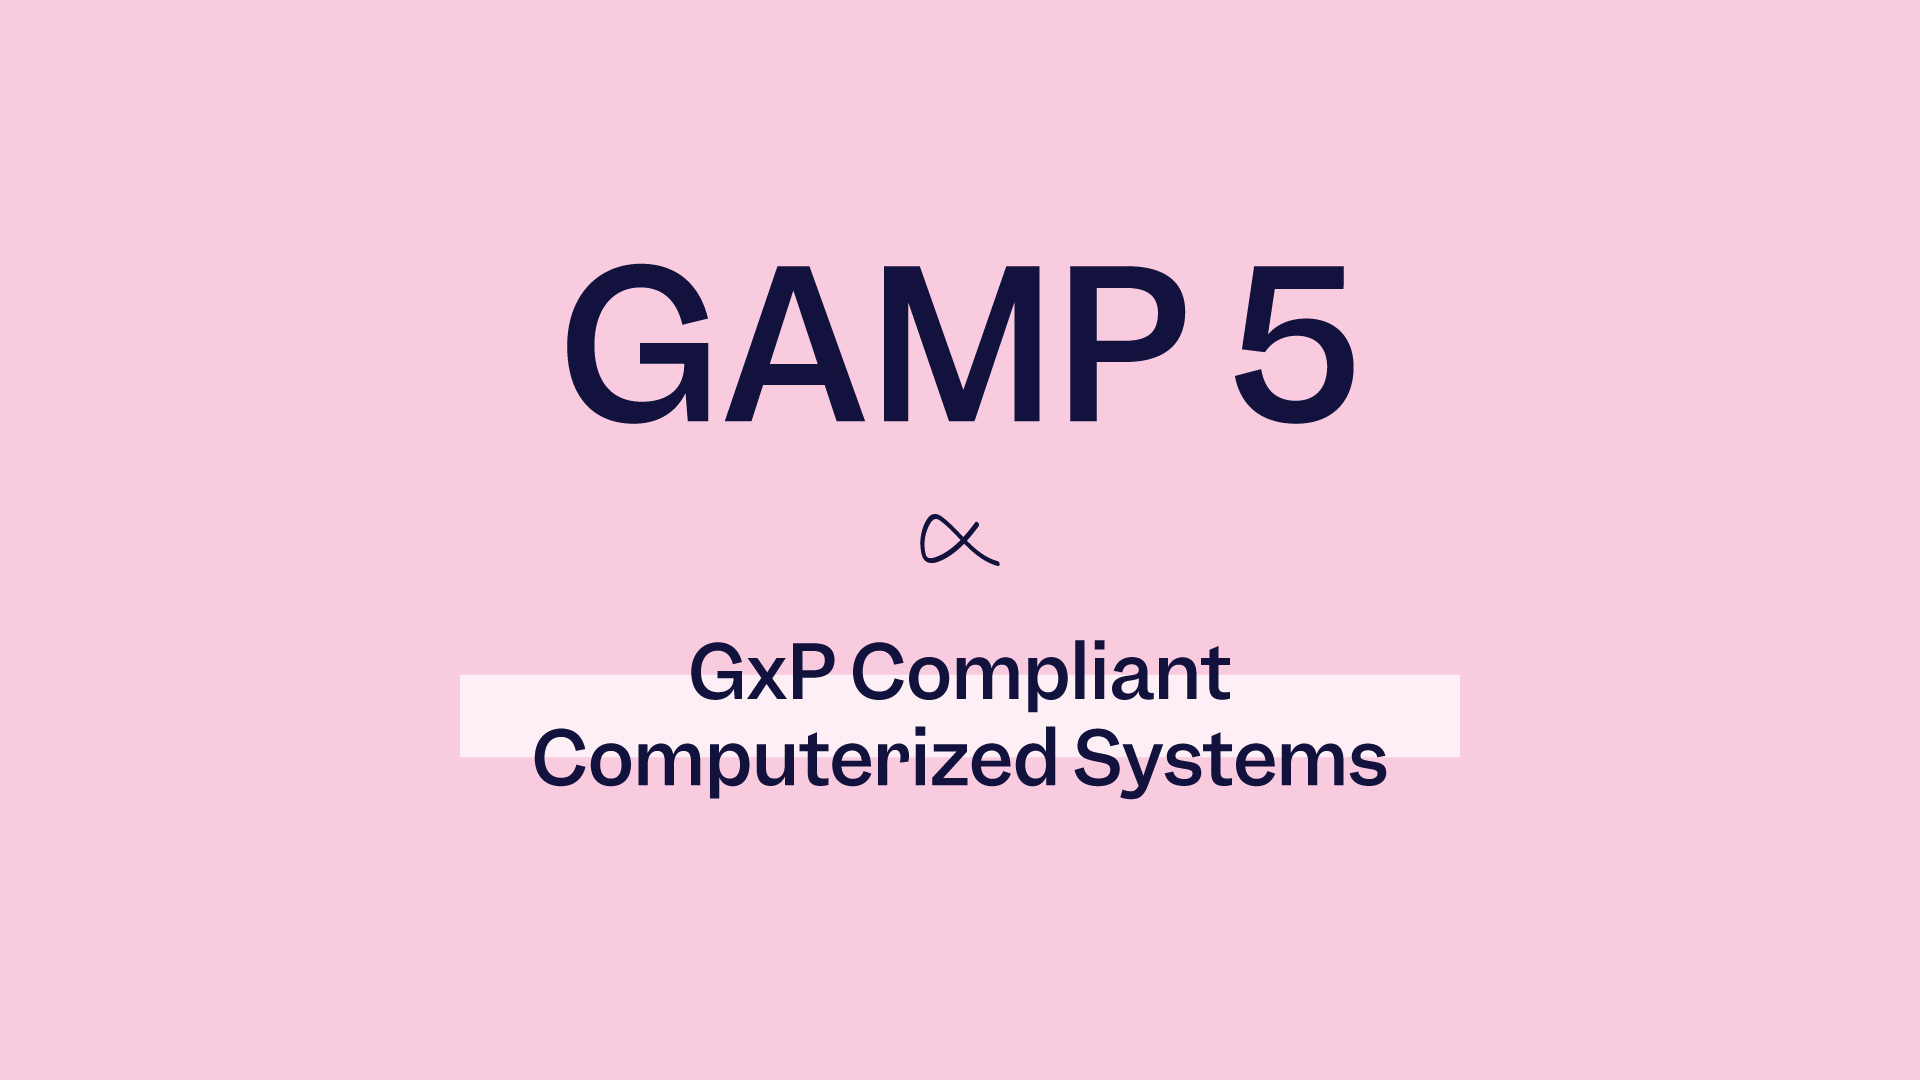 GAMP 5 for GxP Compliant Computerized Systems | Scilife